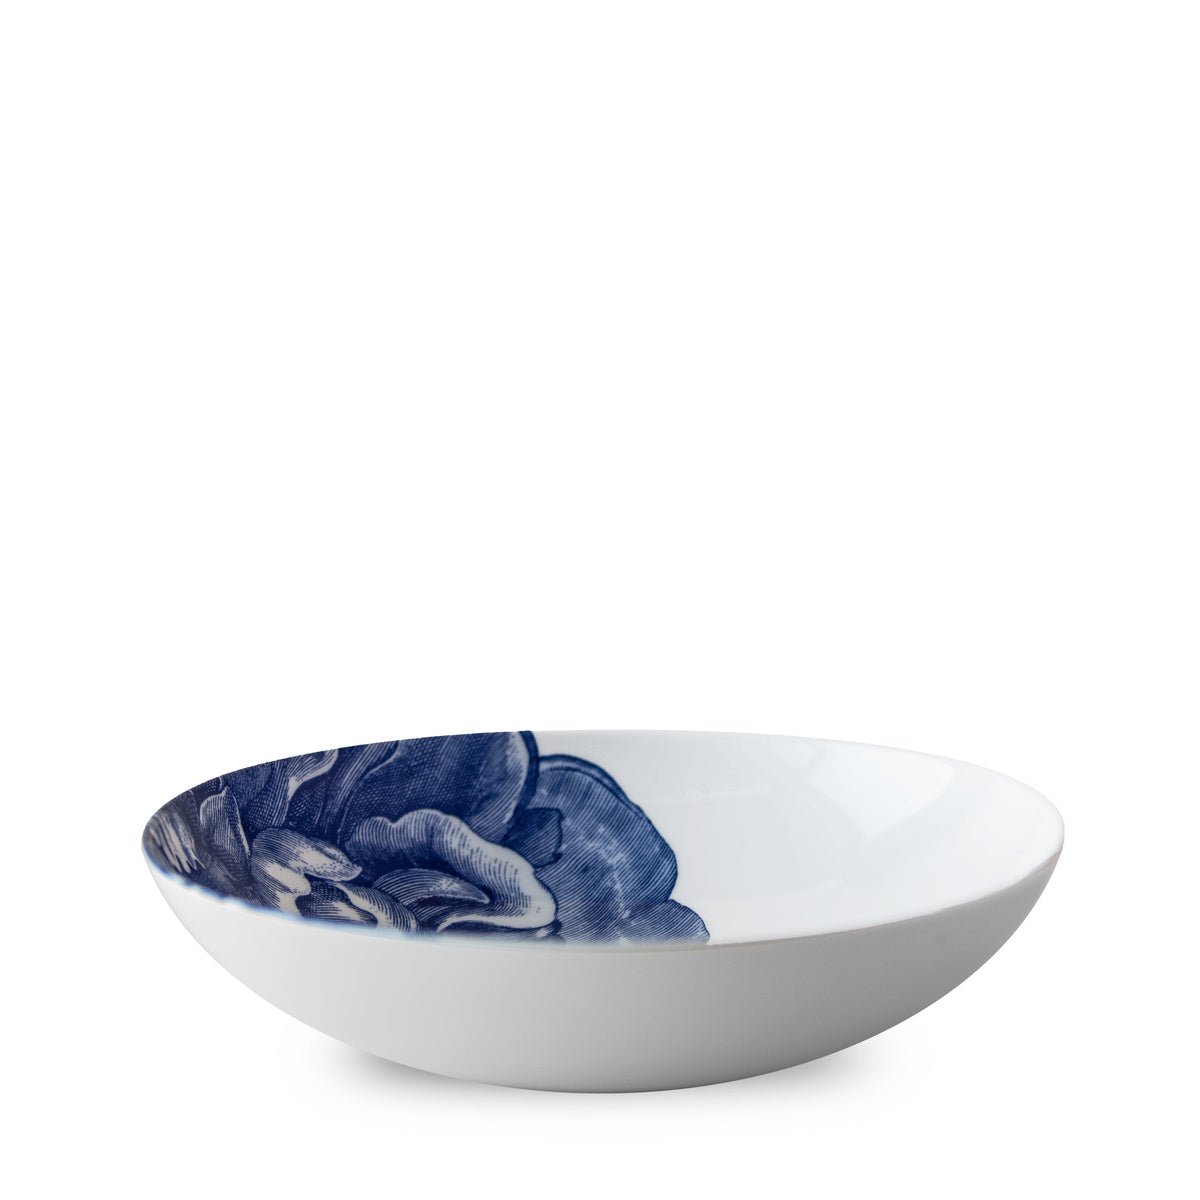 A Peony Blue Coupe Soup Bowl with a peony flower on it from Caskata Artisanal Home.